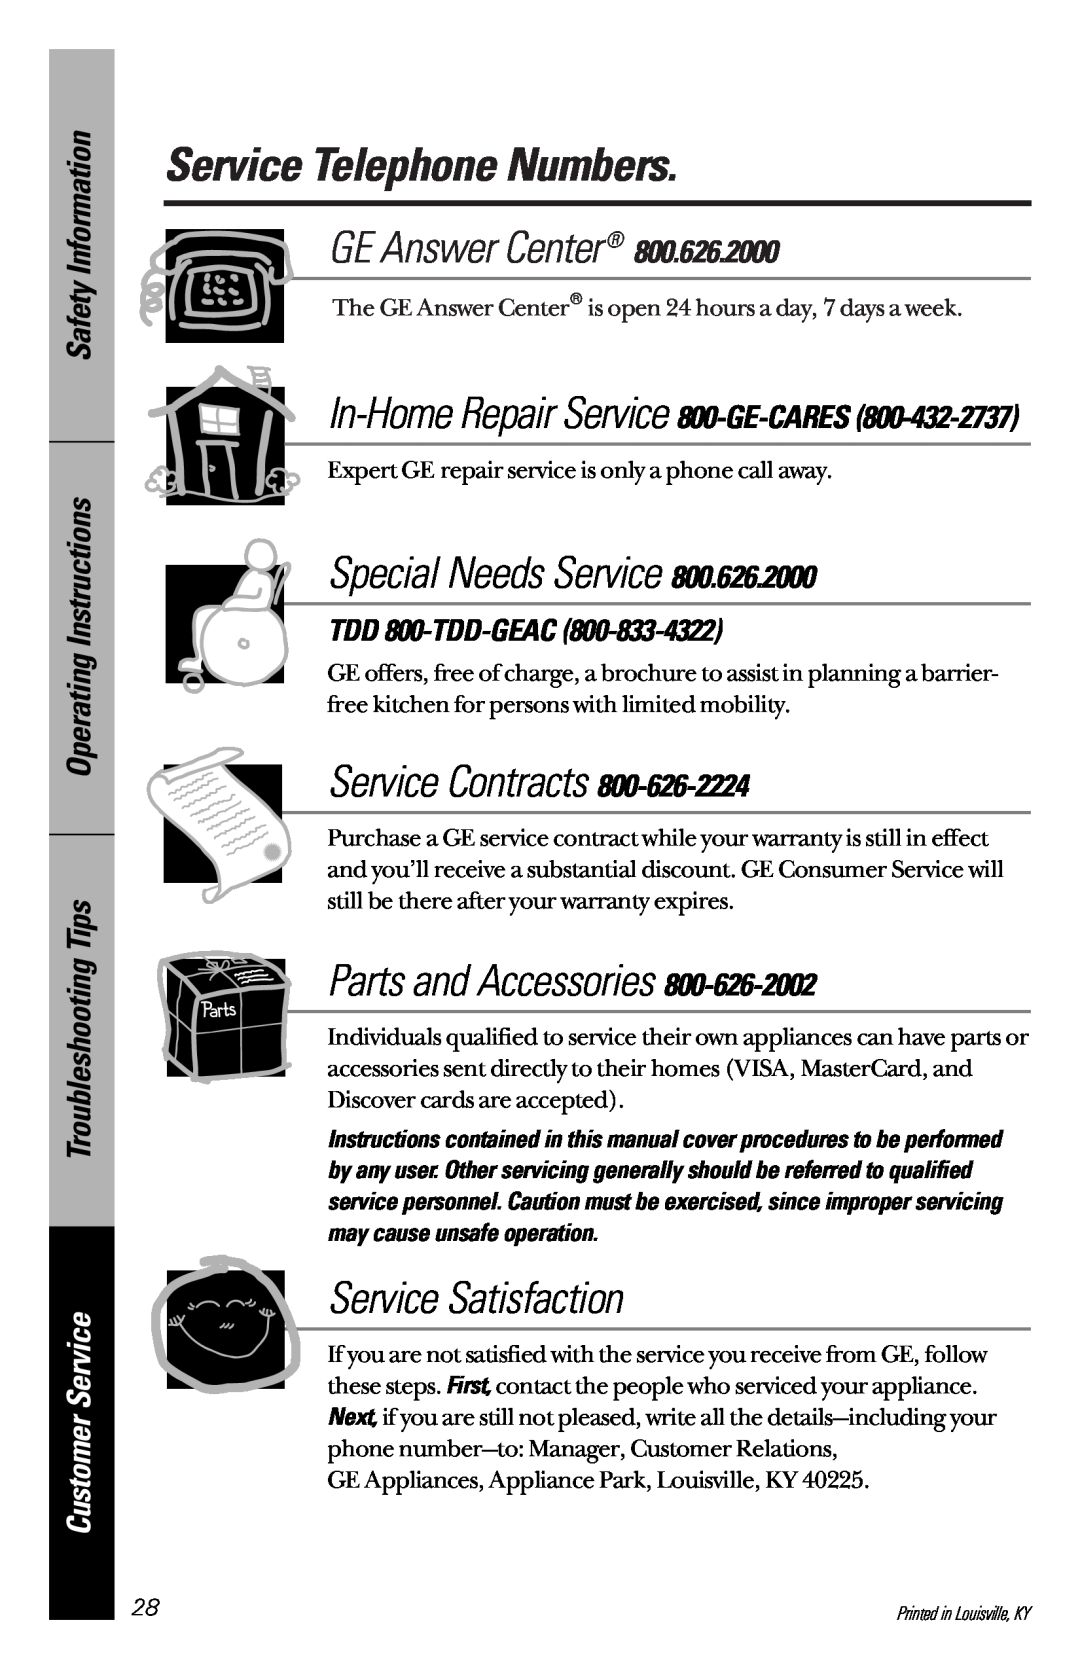 GE GSD2600, GSD2300 Service Telephone Numbers, Customer Service, TDD 800-TDD-GEAC, GE Answer Center, Special Needs Service 